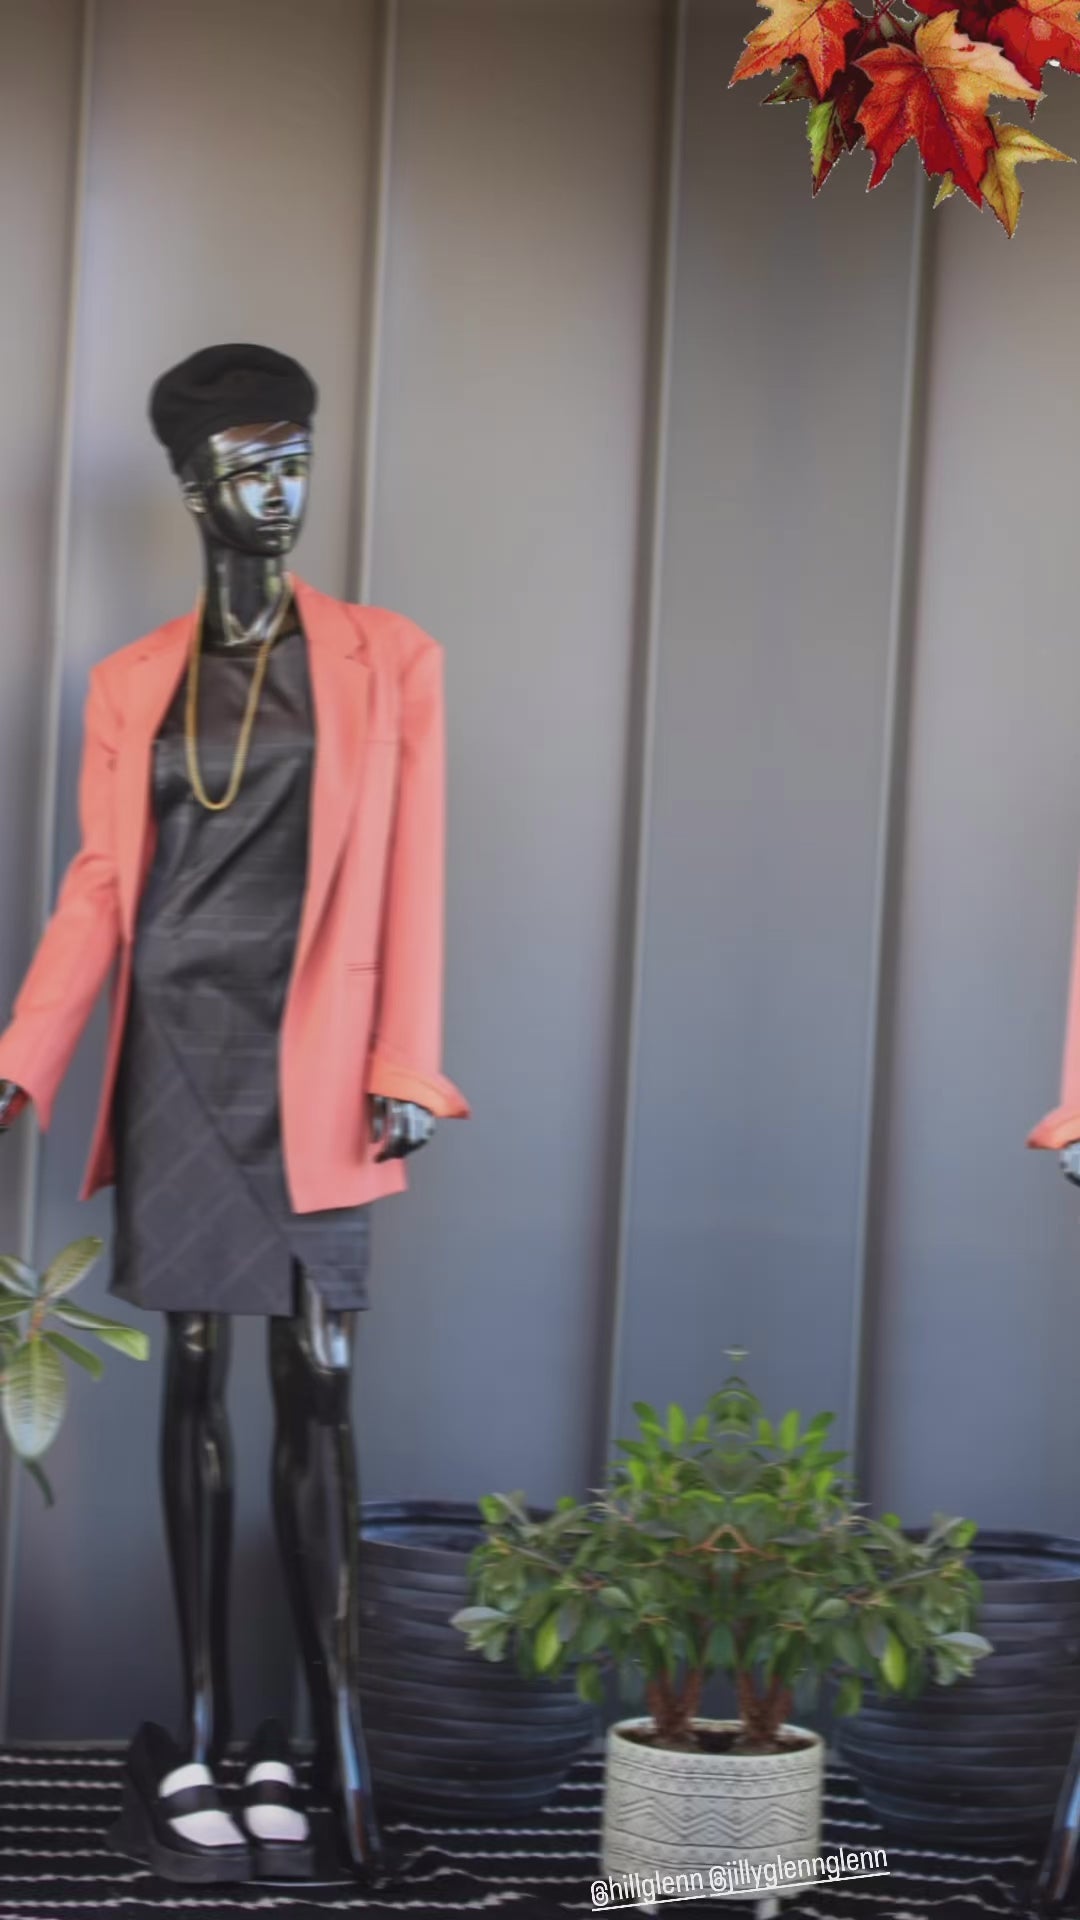 Load video: Glenn + Glenn harvest-inspired outfits in high contrast neutrals featuring Italian wool.